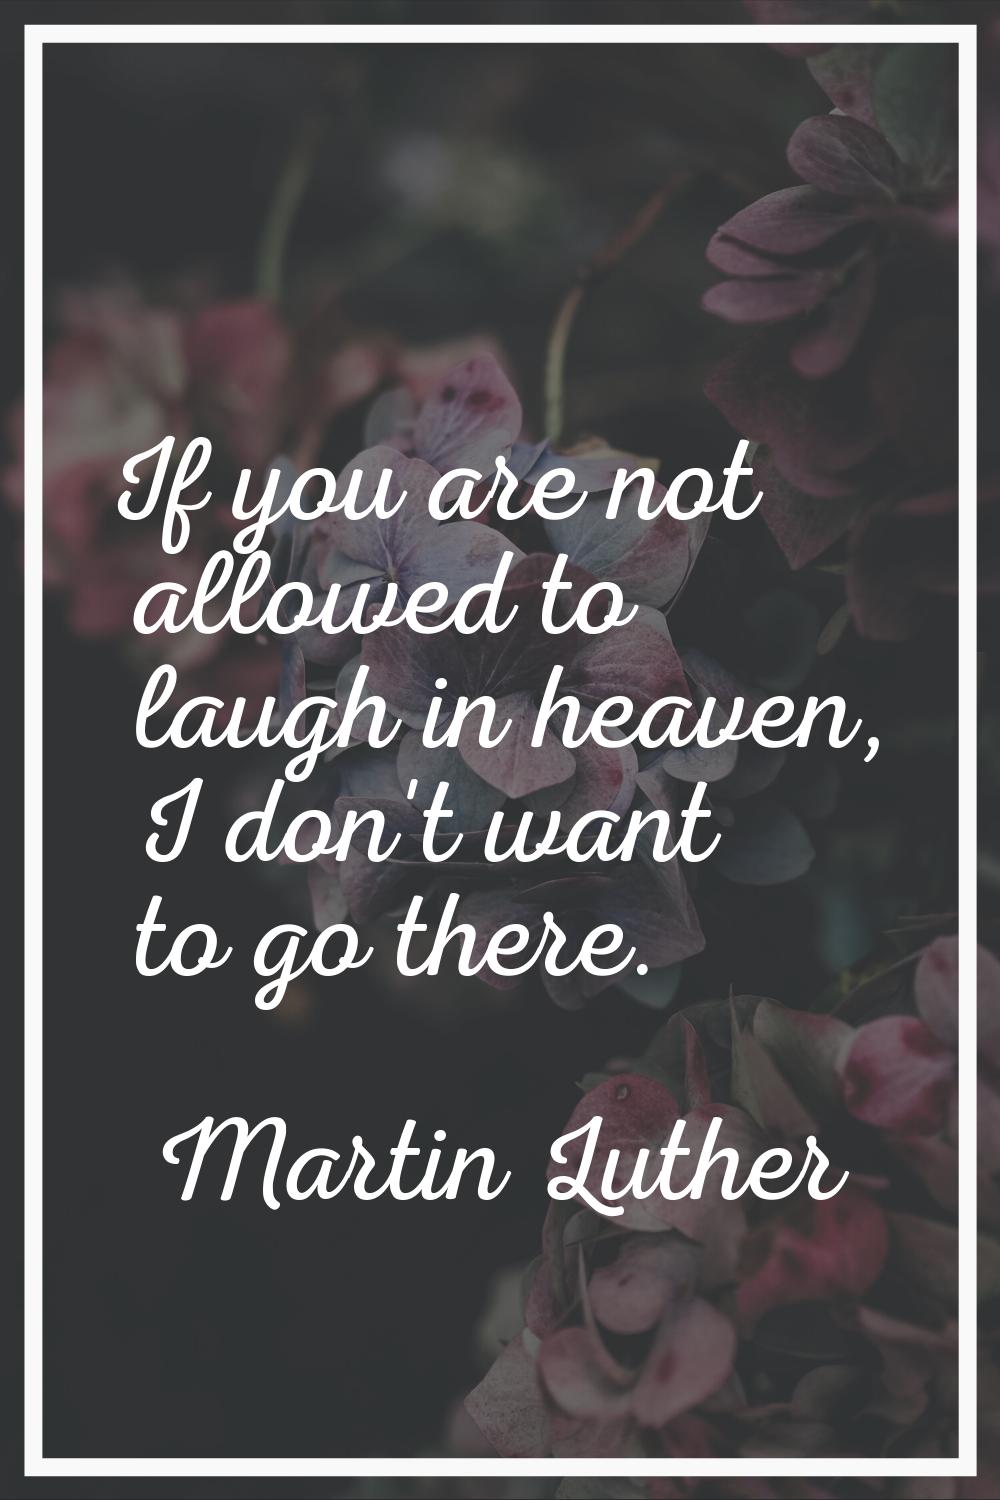 If you are not allowed to laugh in heaven, I don't want to go there.